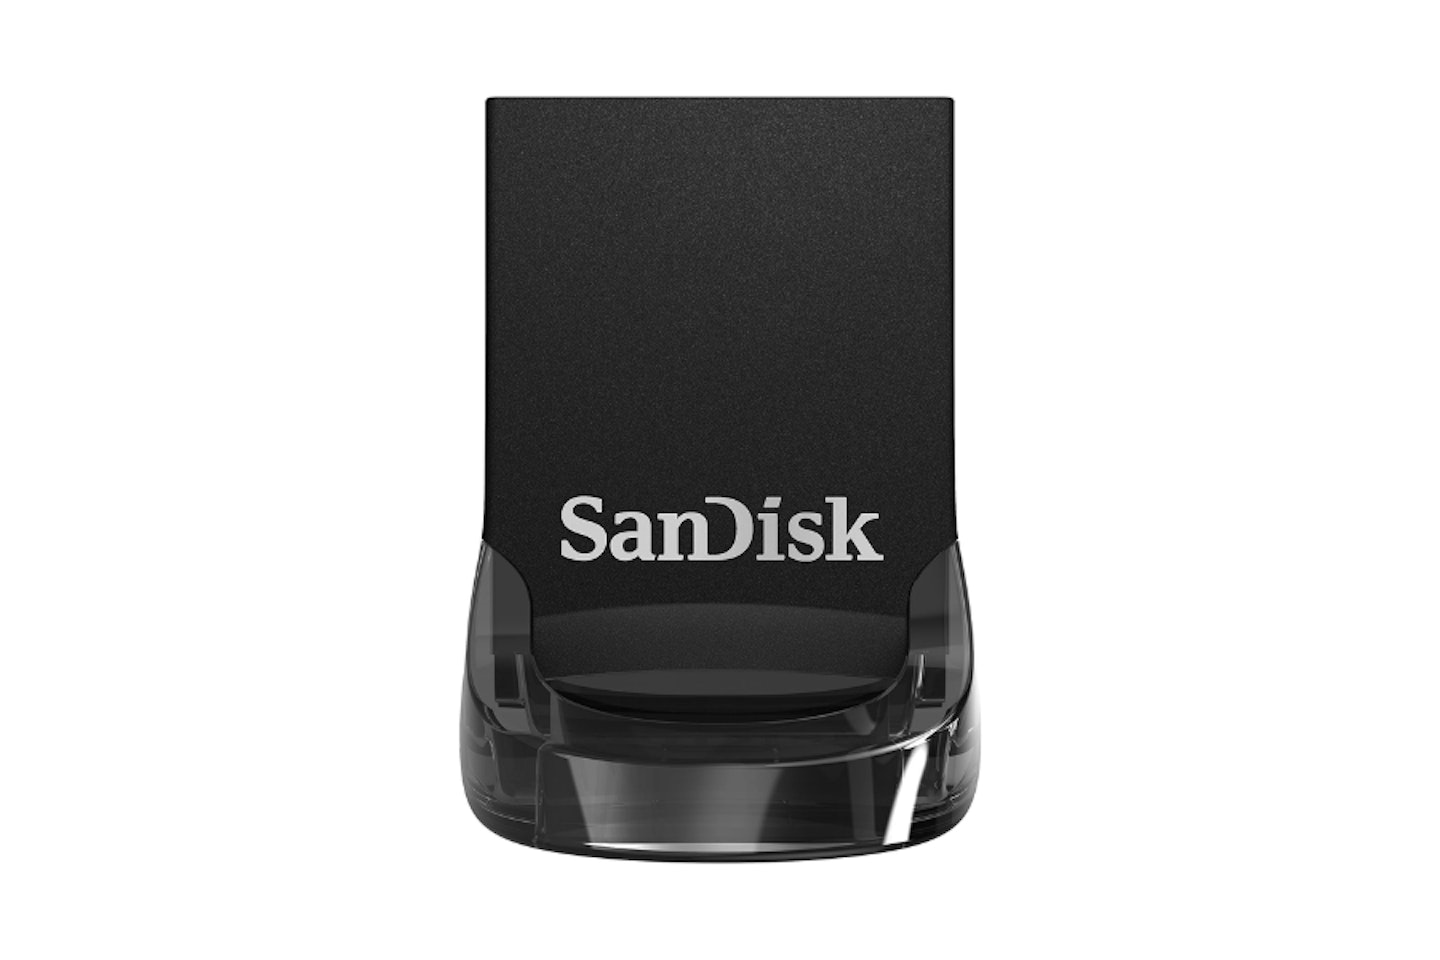 SanDisk 512GB Ultra Fit USB 3.2 Flash Drive - one of the best SanDisk USB stick devices